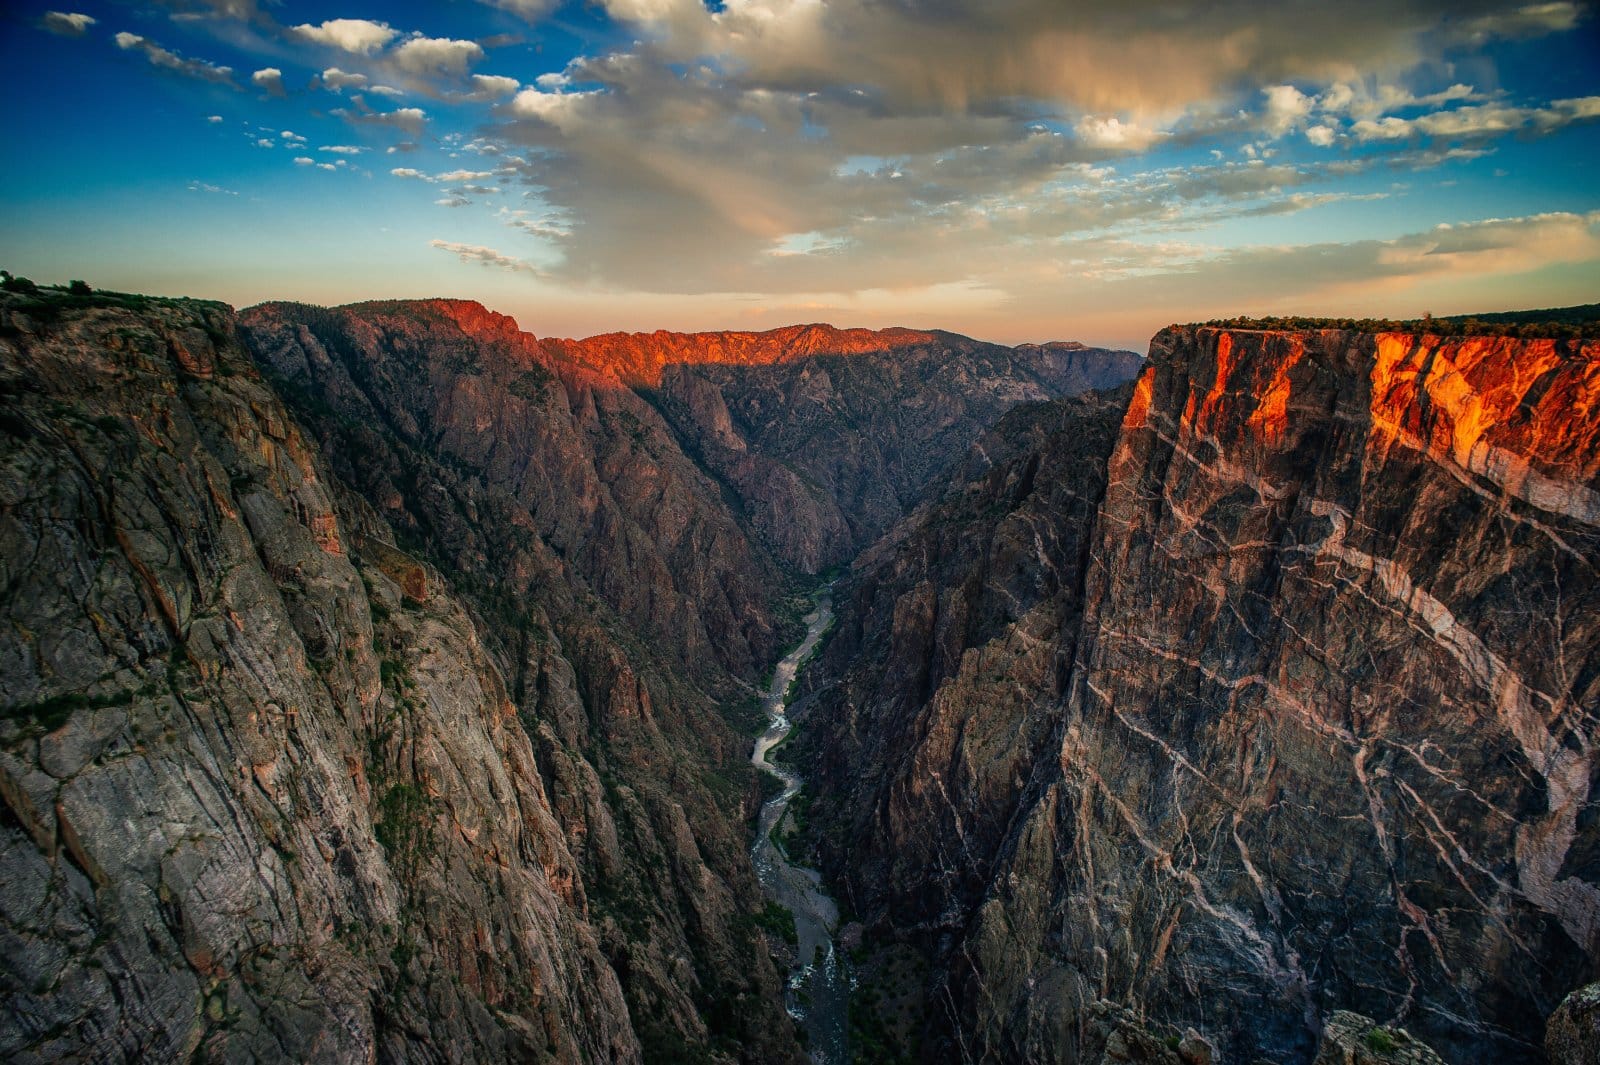 <p class="wp-caption-text">Image Credit: Shutterstock / Kyootaek Choi</p>  <p><span>The dark skies of Black Canyon of the Gunnison offer unparalleled stargazing. Spring nights are crisp, perfect for astronomy buffs. Free access, with camping spots available for a fee.</span></p>